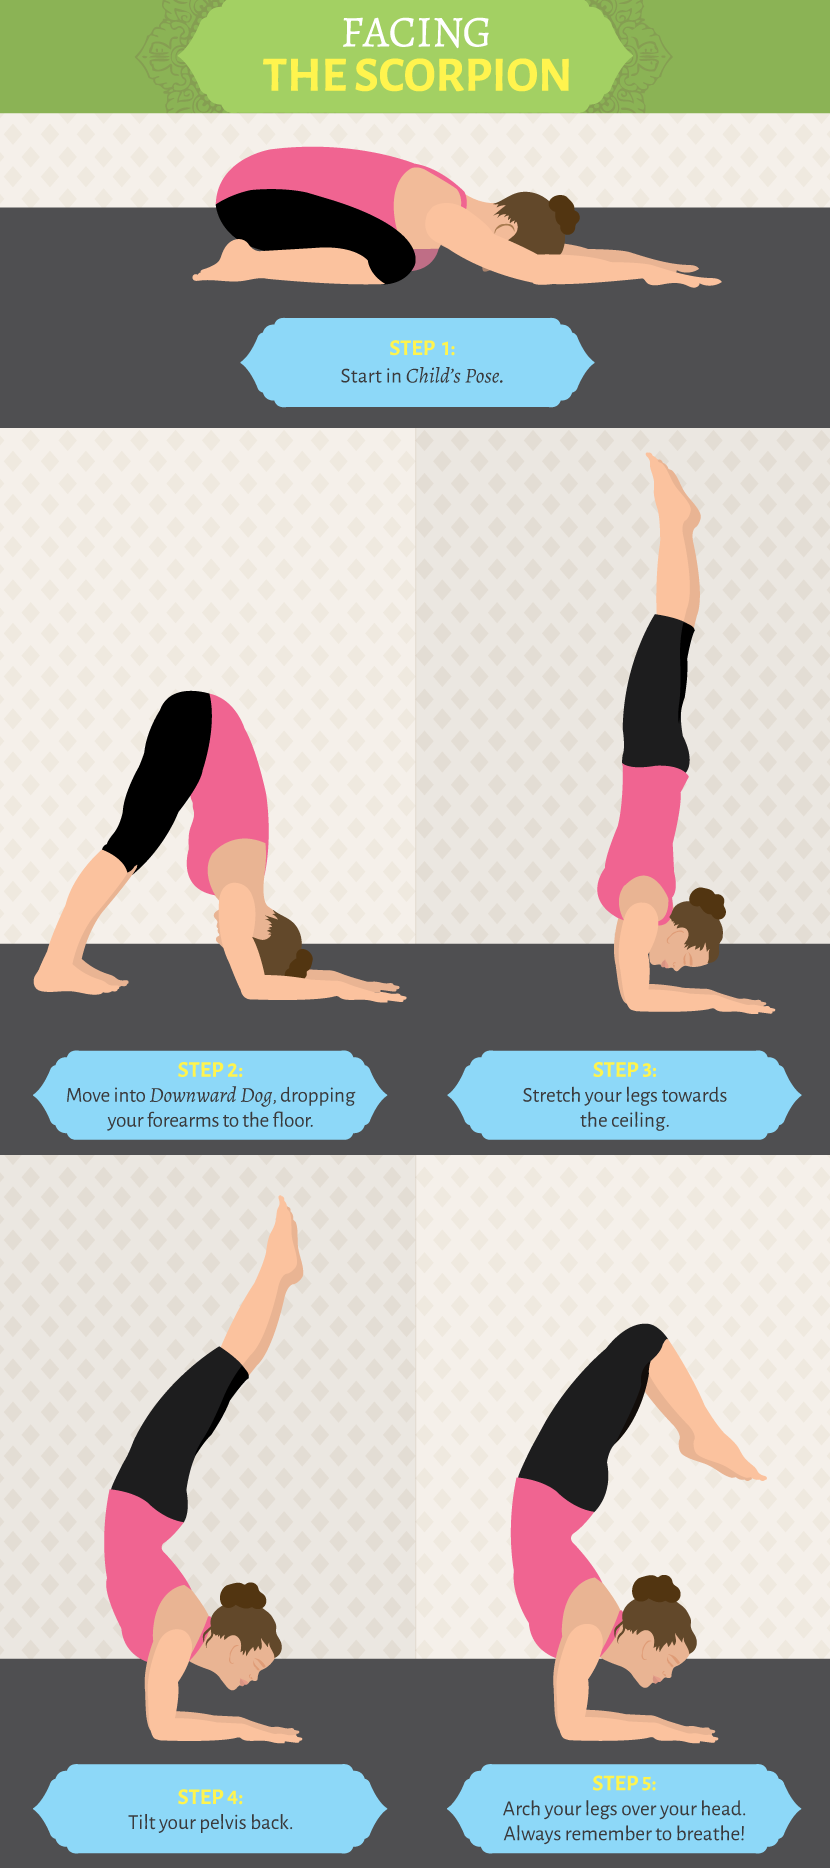 35 Hard Yoga Poses: The Most Challenging Yoga Poses - YOGA PRACTICE